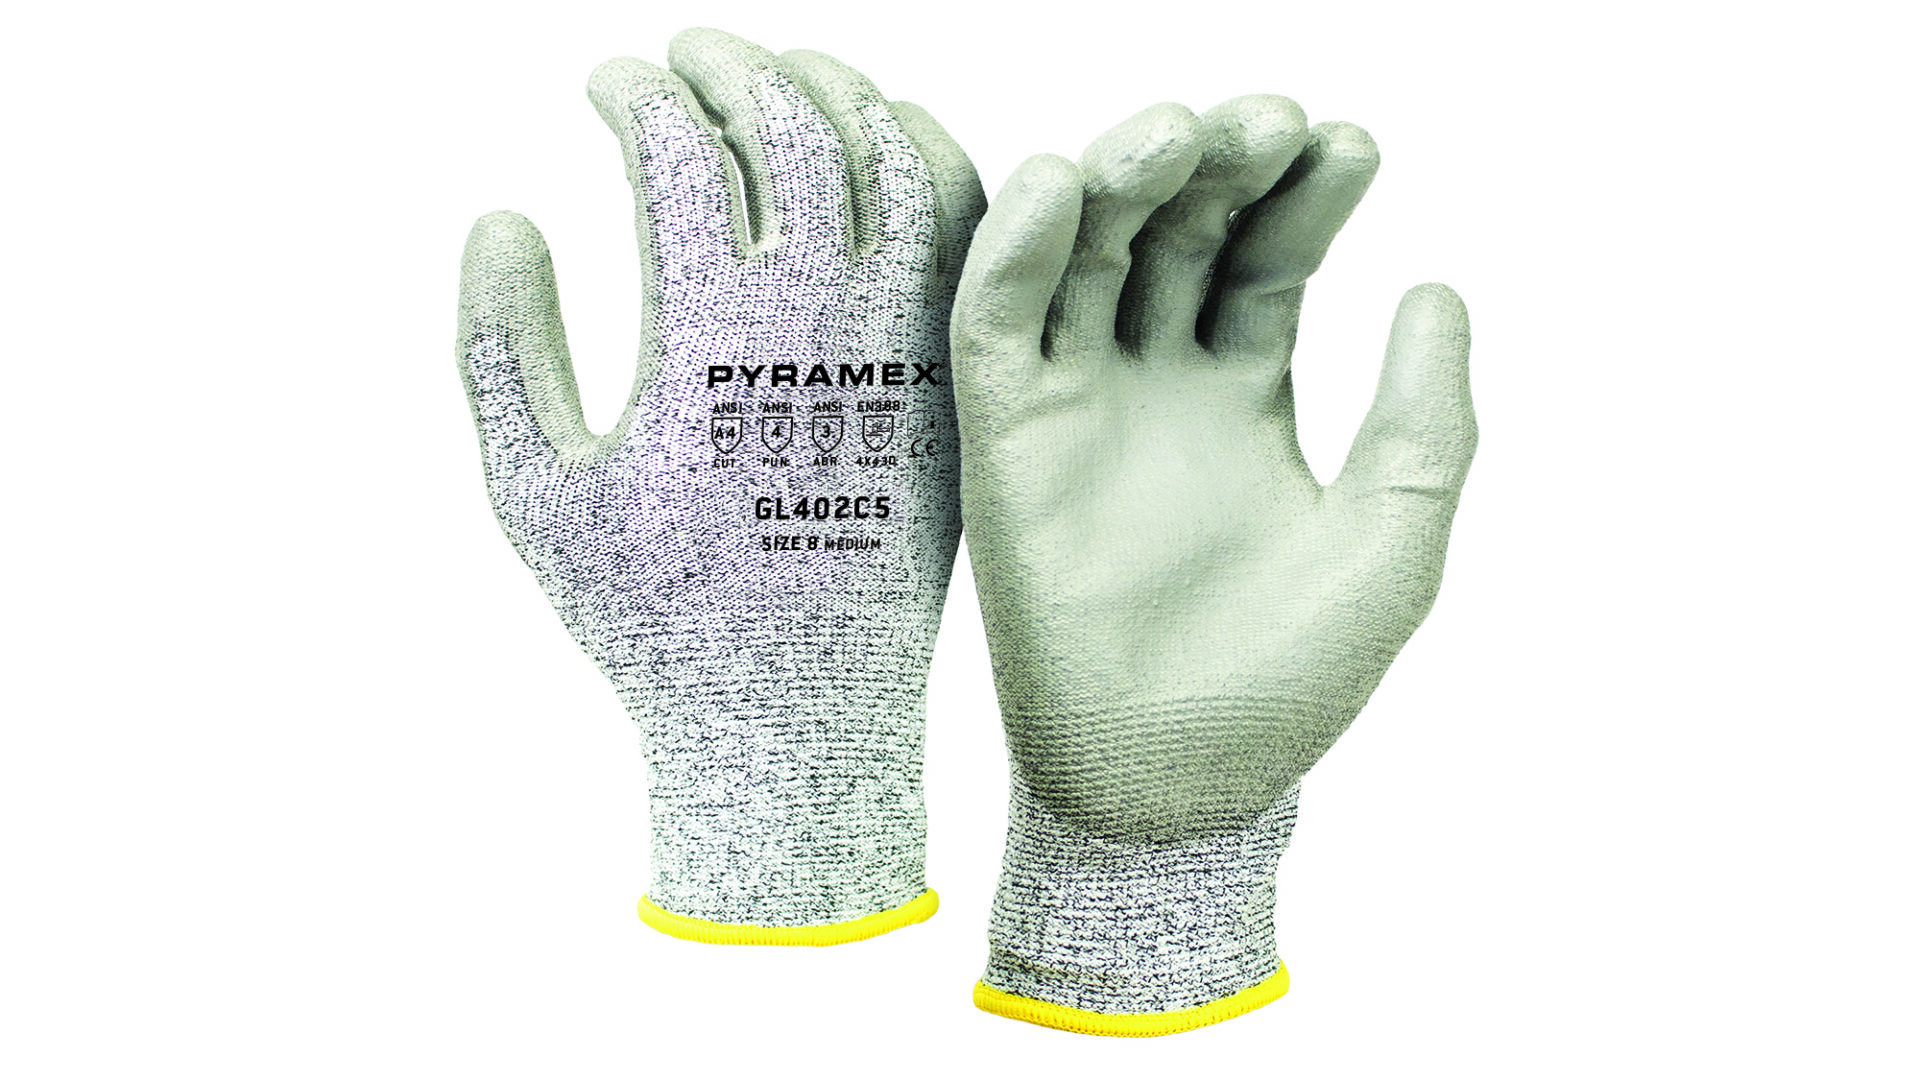 A Light Grey and White Color Gloves Pair Copy